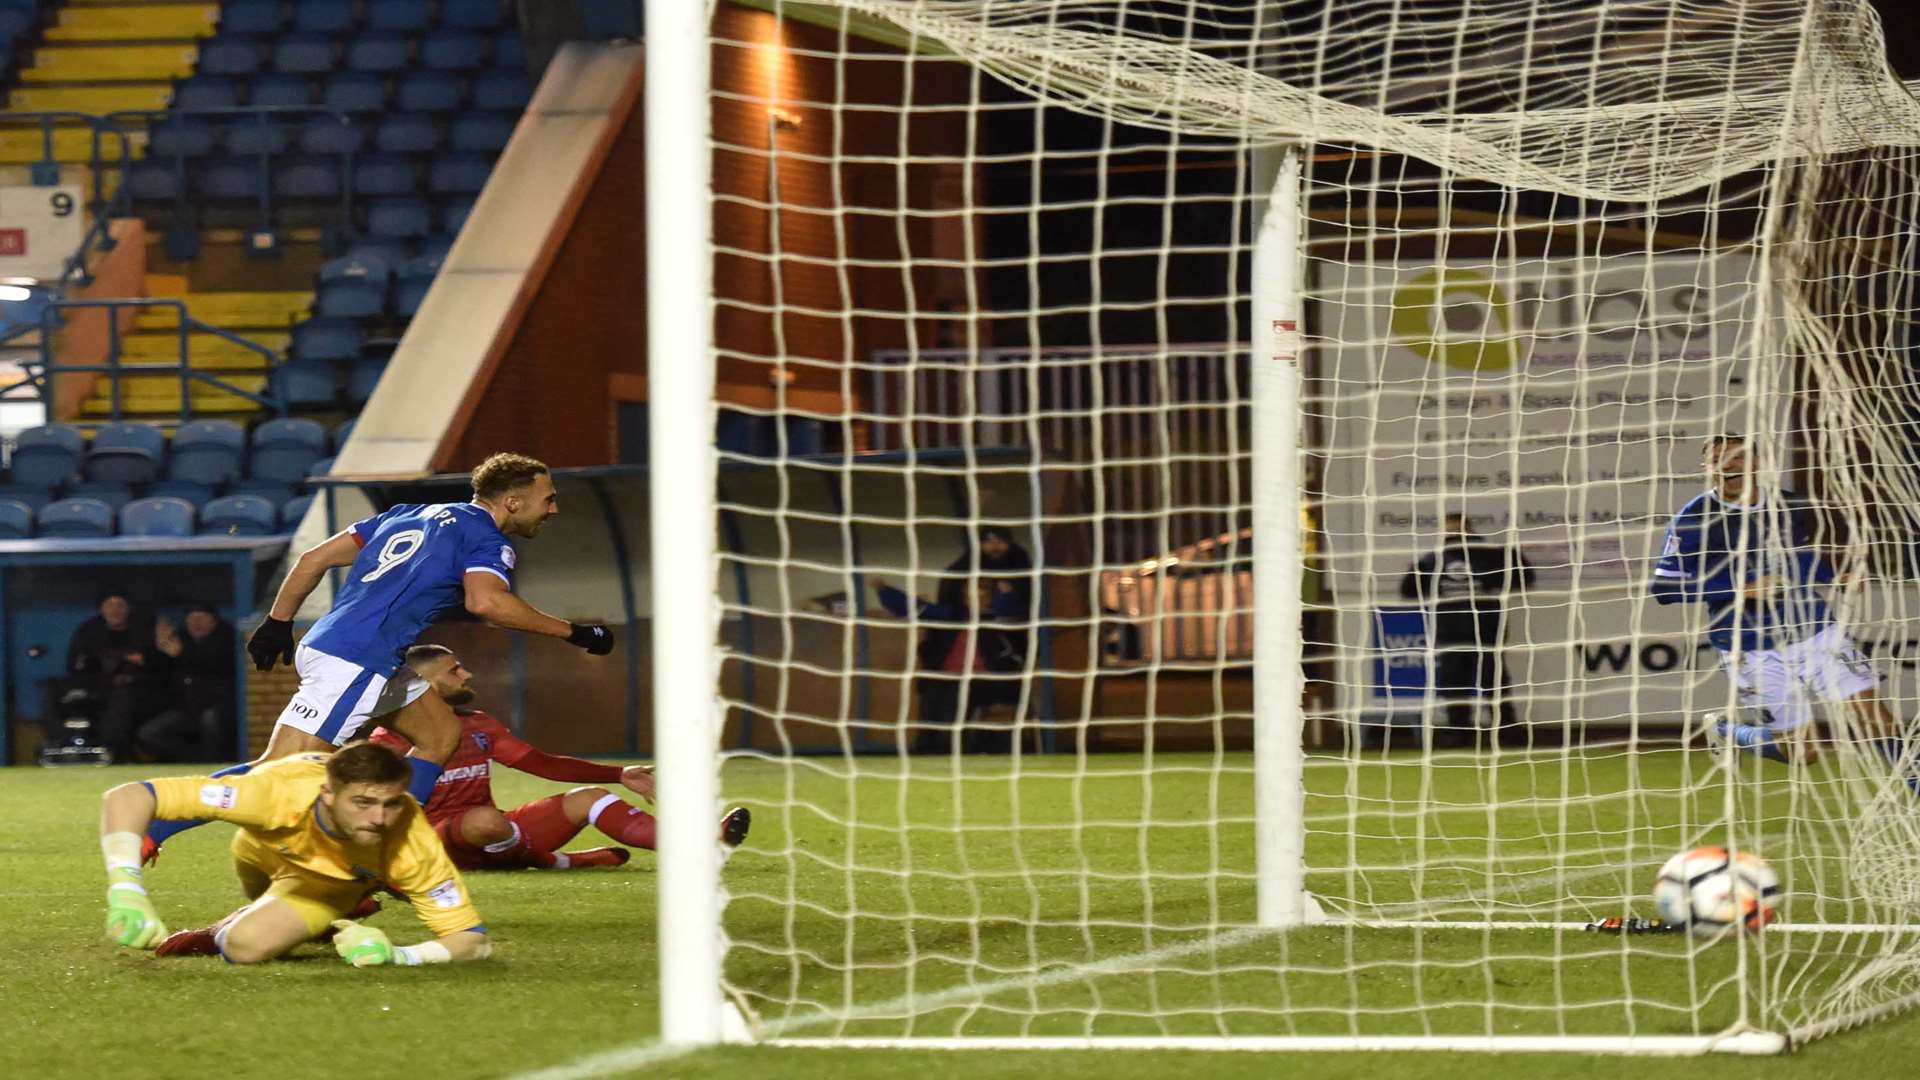 Gills keeper Tomas Holy can only watch on as Hallam Hope scores for Carlisle. Picture: Stuart Walker